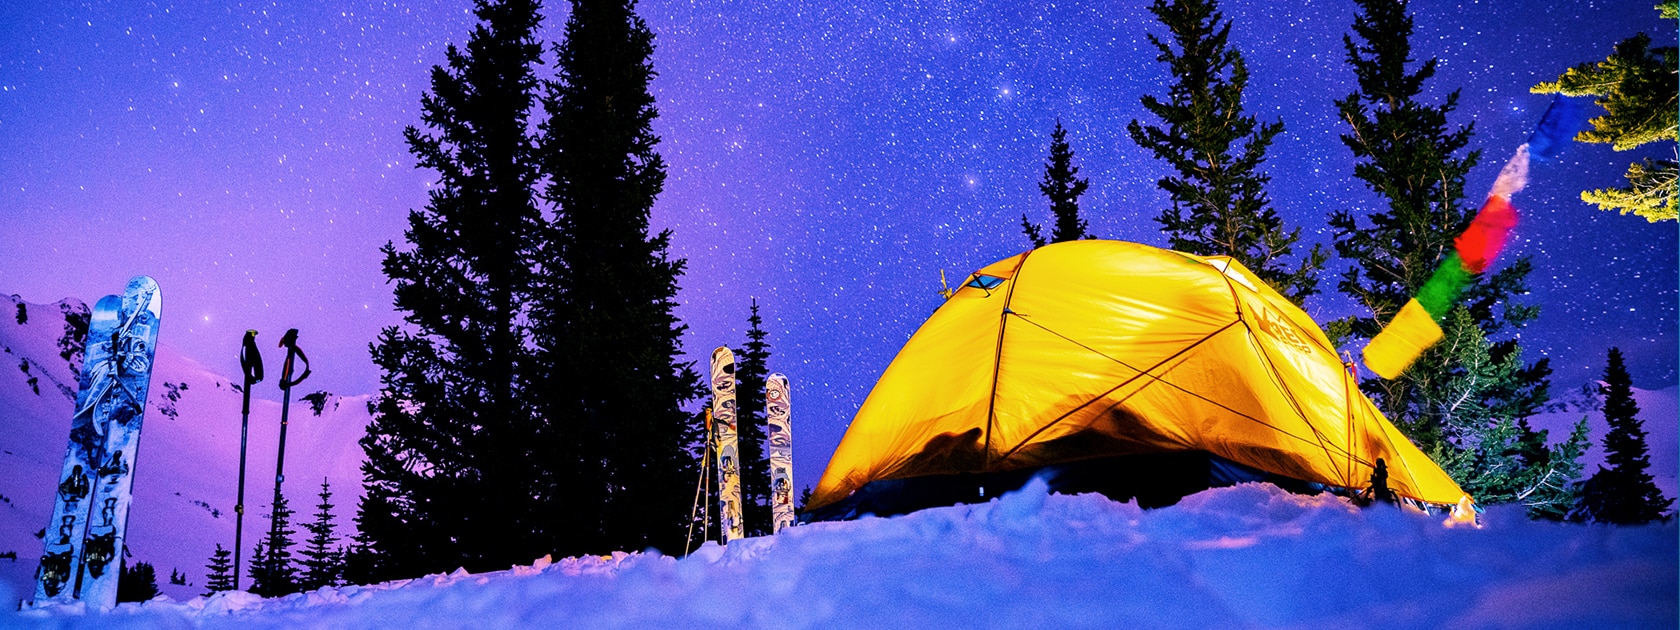 a bright yellow tent sits in the snow surrounded by trees and a starry night sky